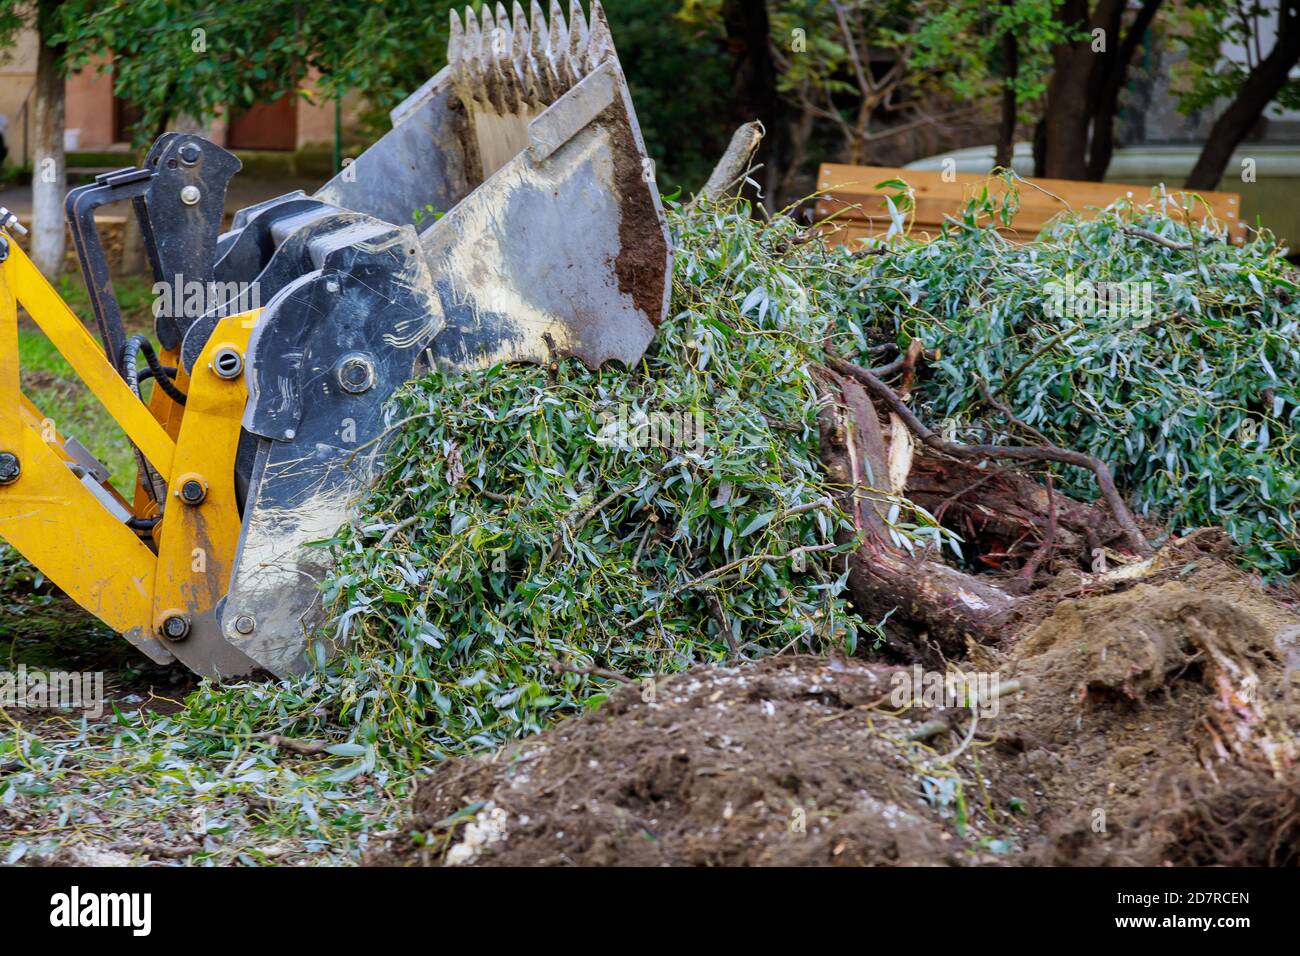 Excavator clearing land from roots and branches trees with dirt and trash yard work backhoe machinery Stock Photo